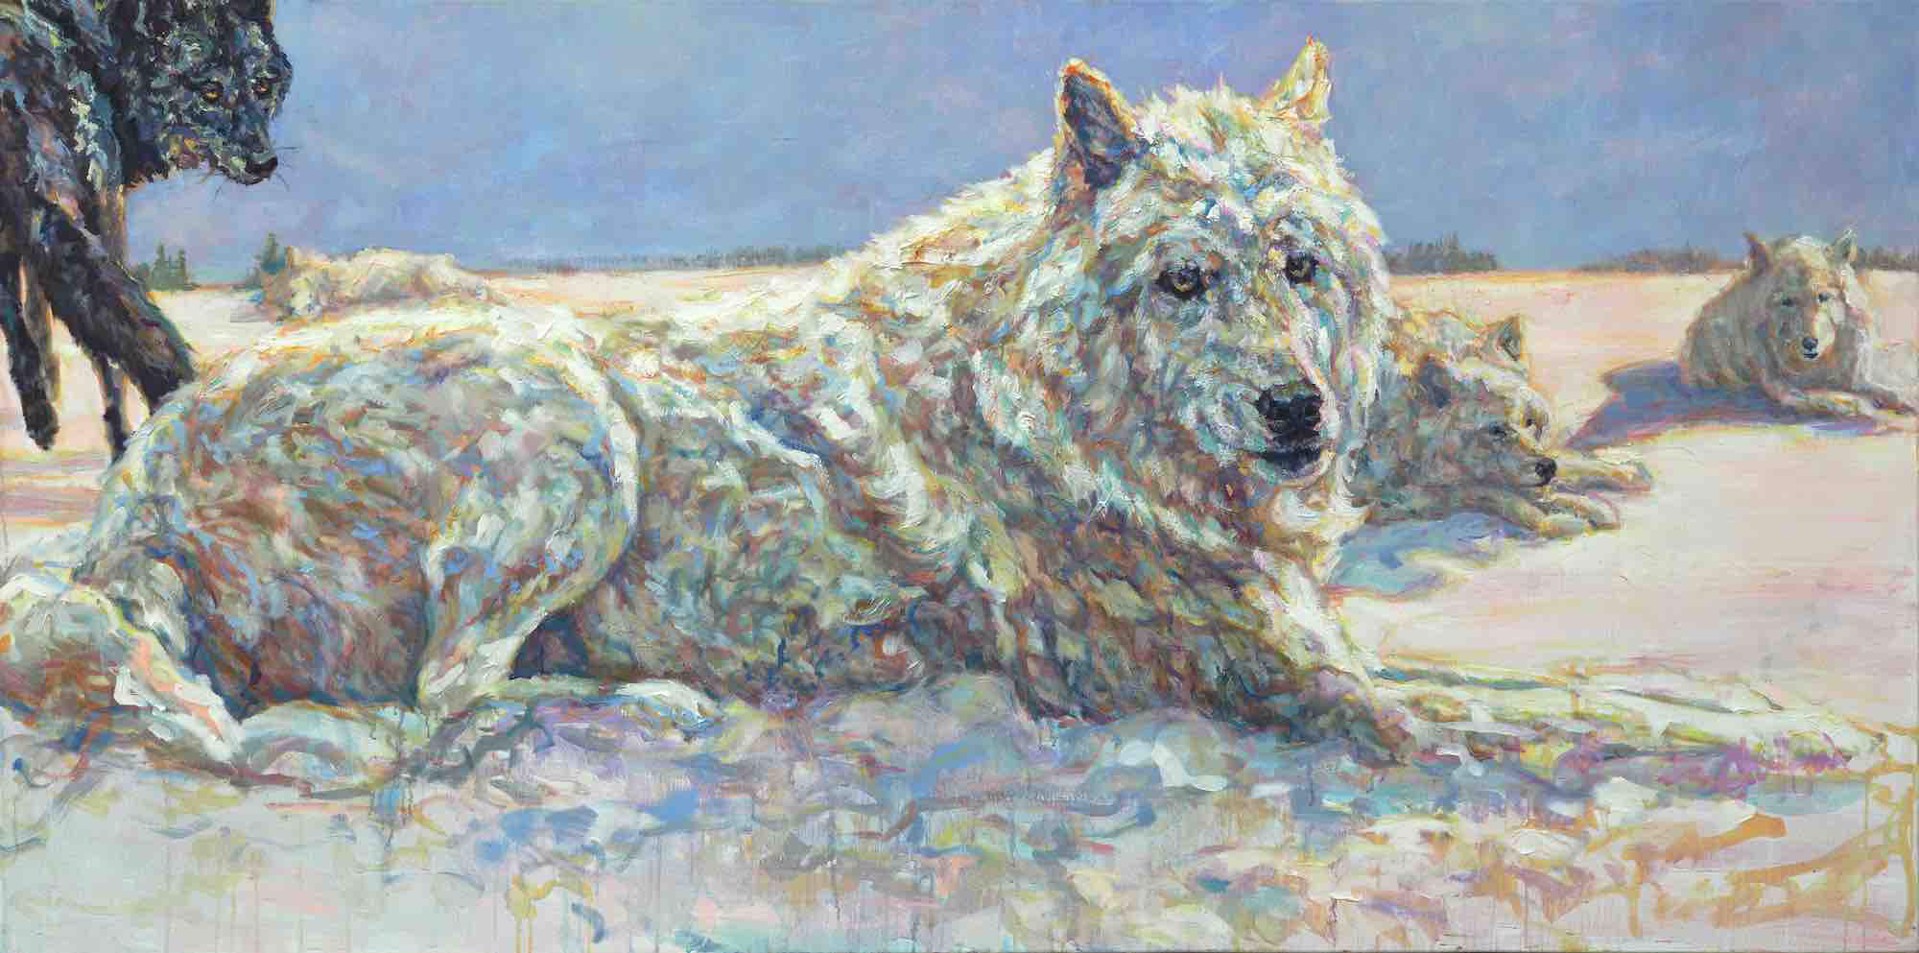 Pack Of Wolves Waking Up To Pink Sunrise Horizontal Painting By Patricia Griffin At Gallery Wild.